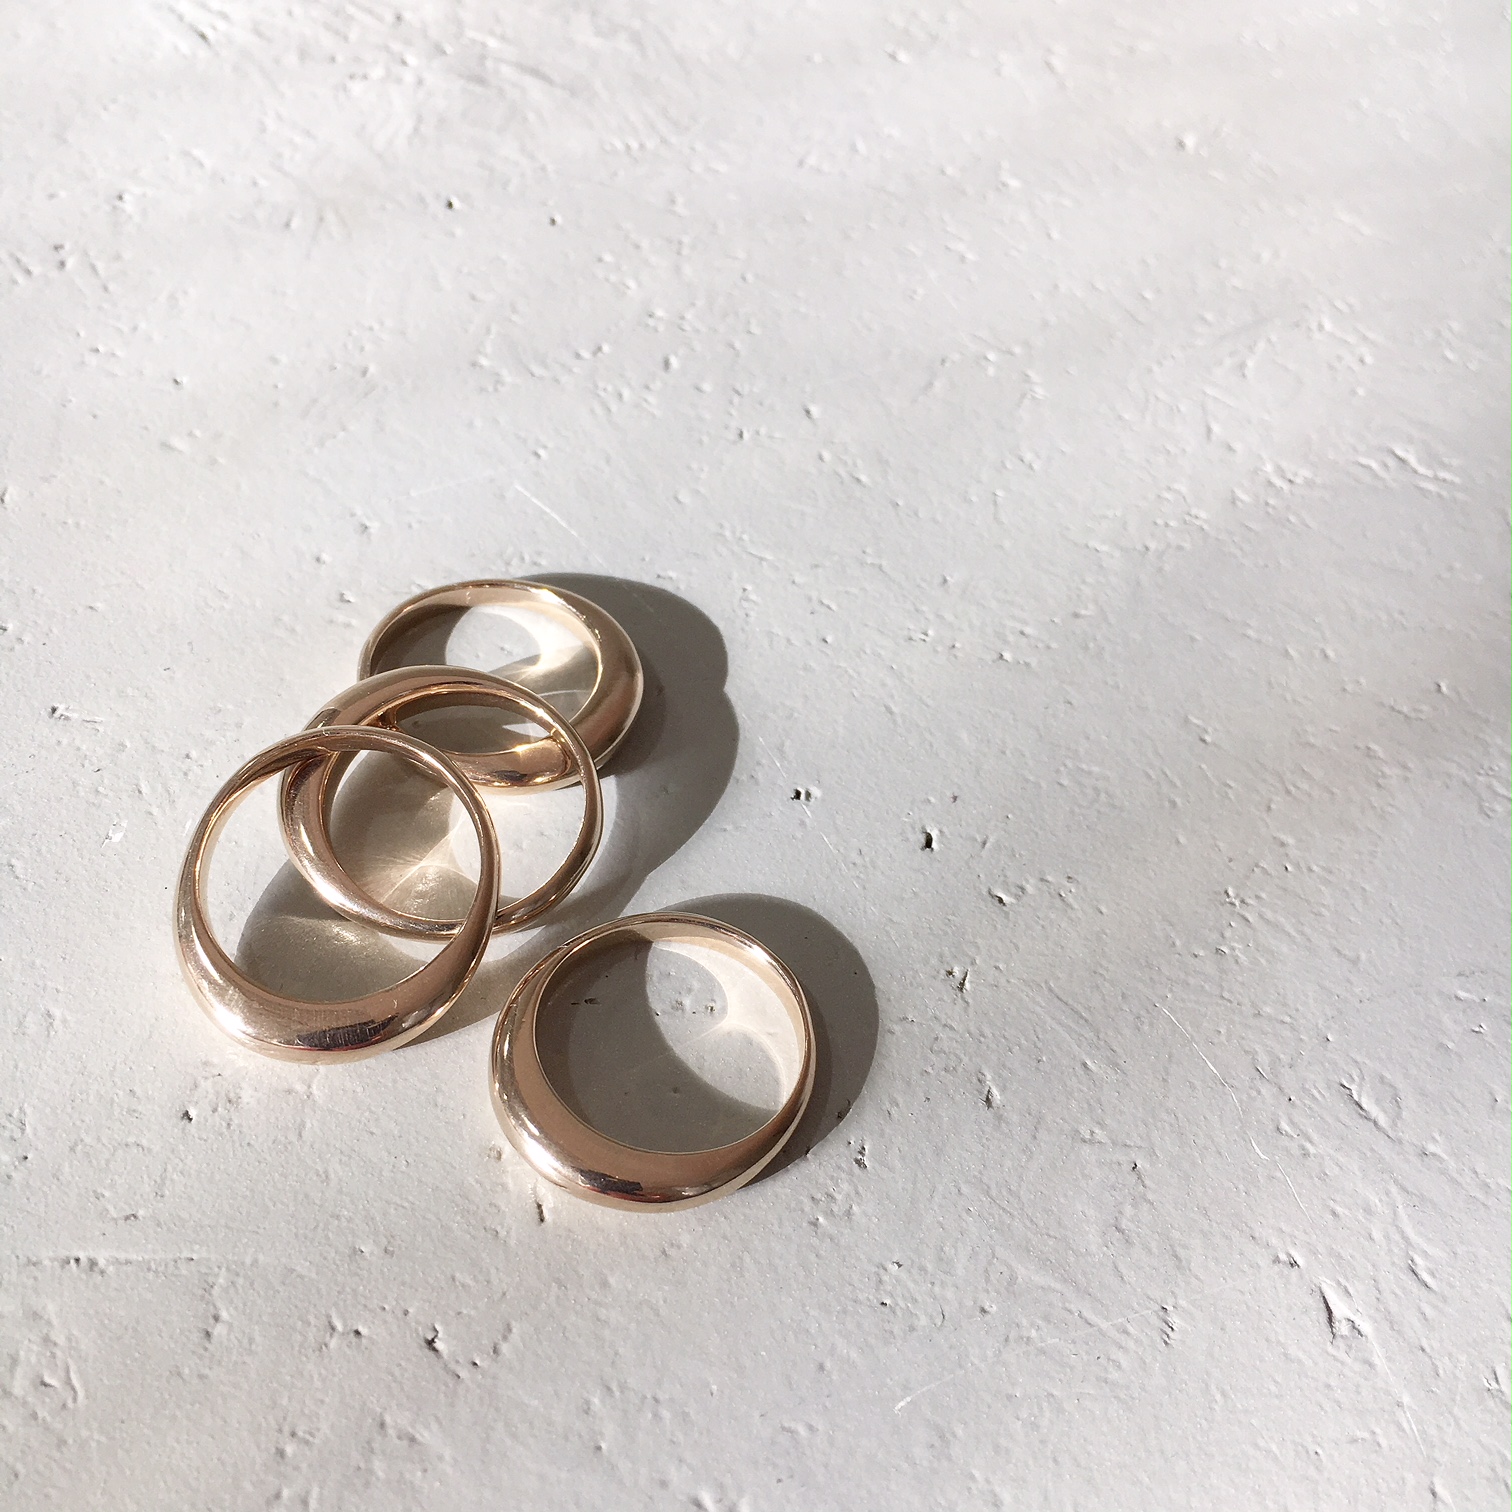 About Brass Metal & How to clean Brass Jewelry